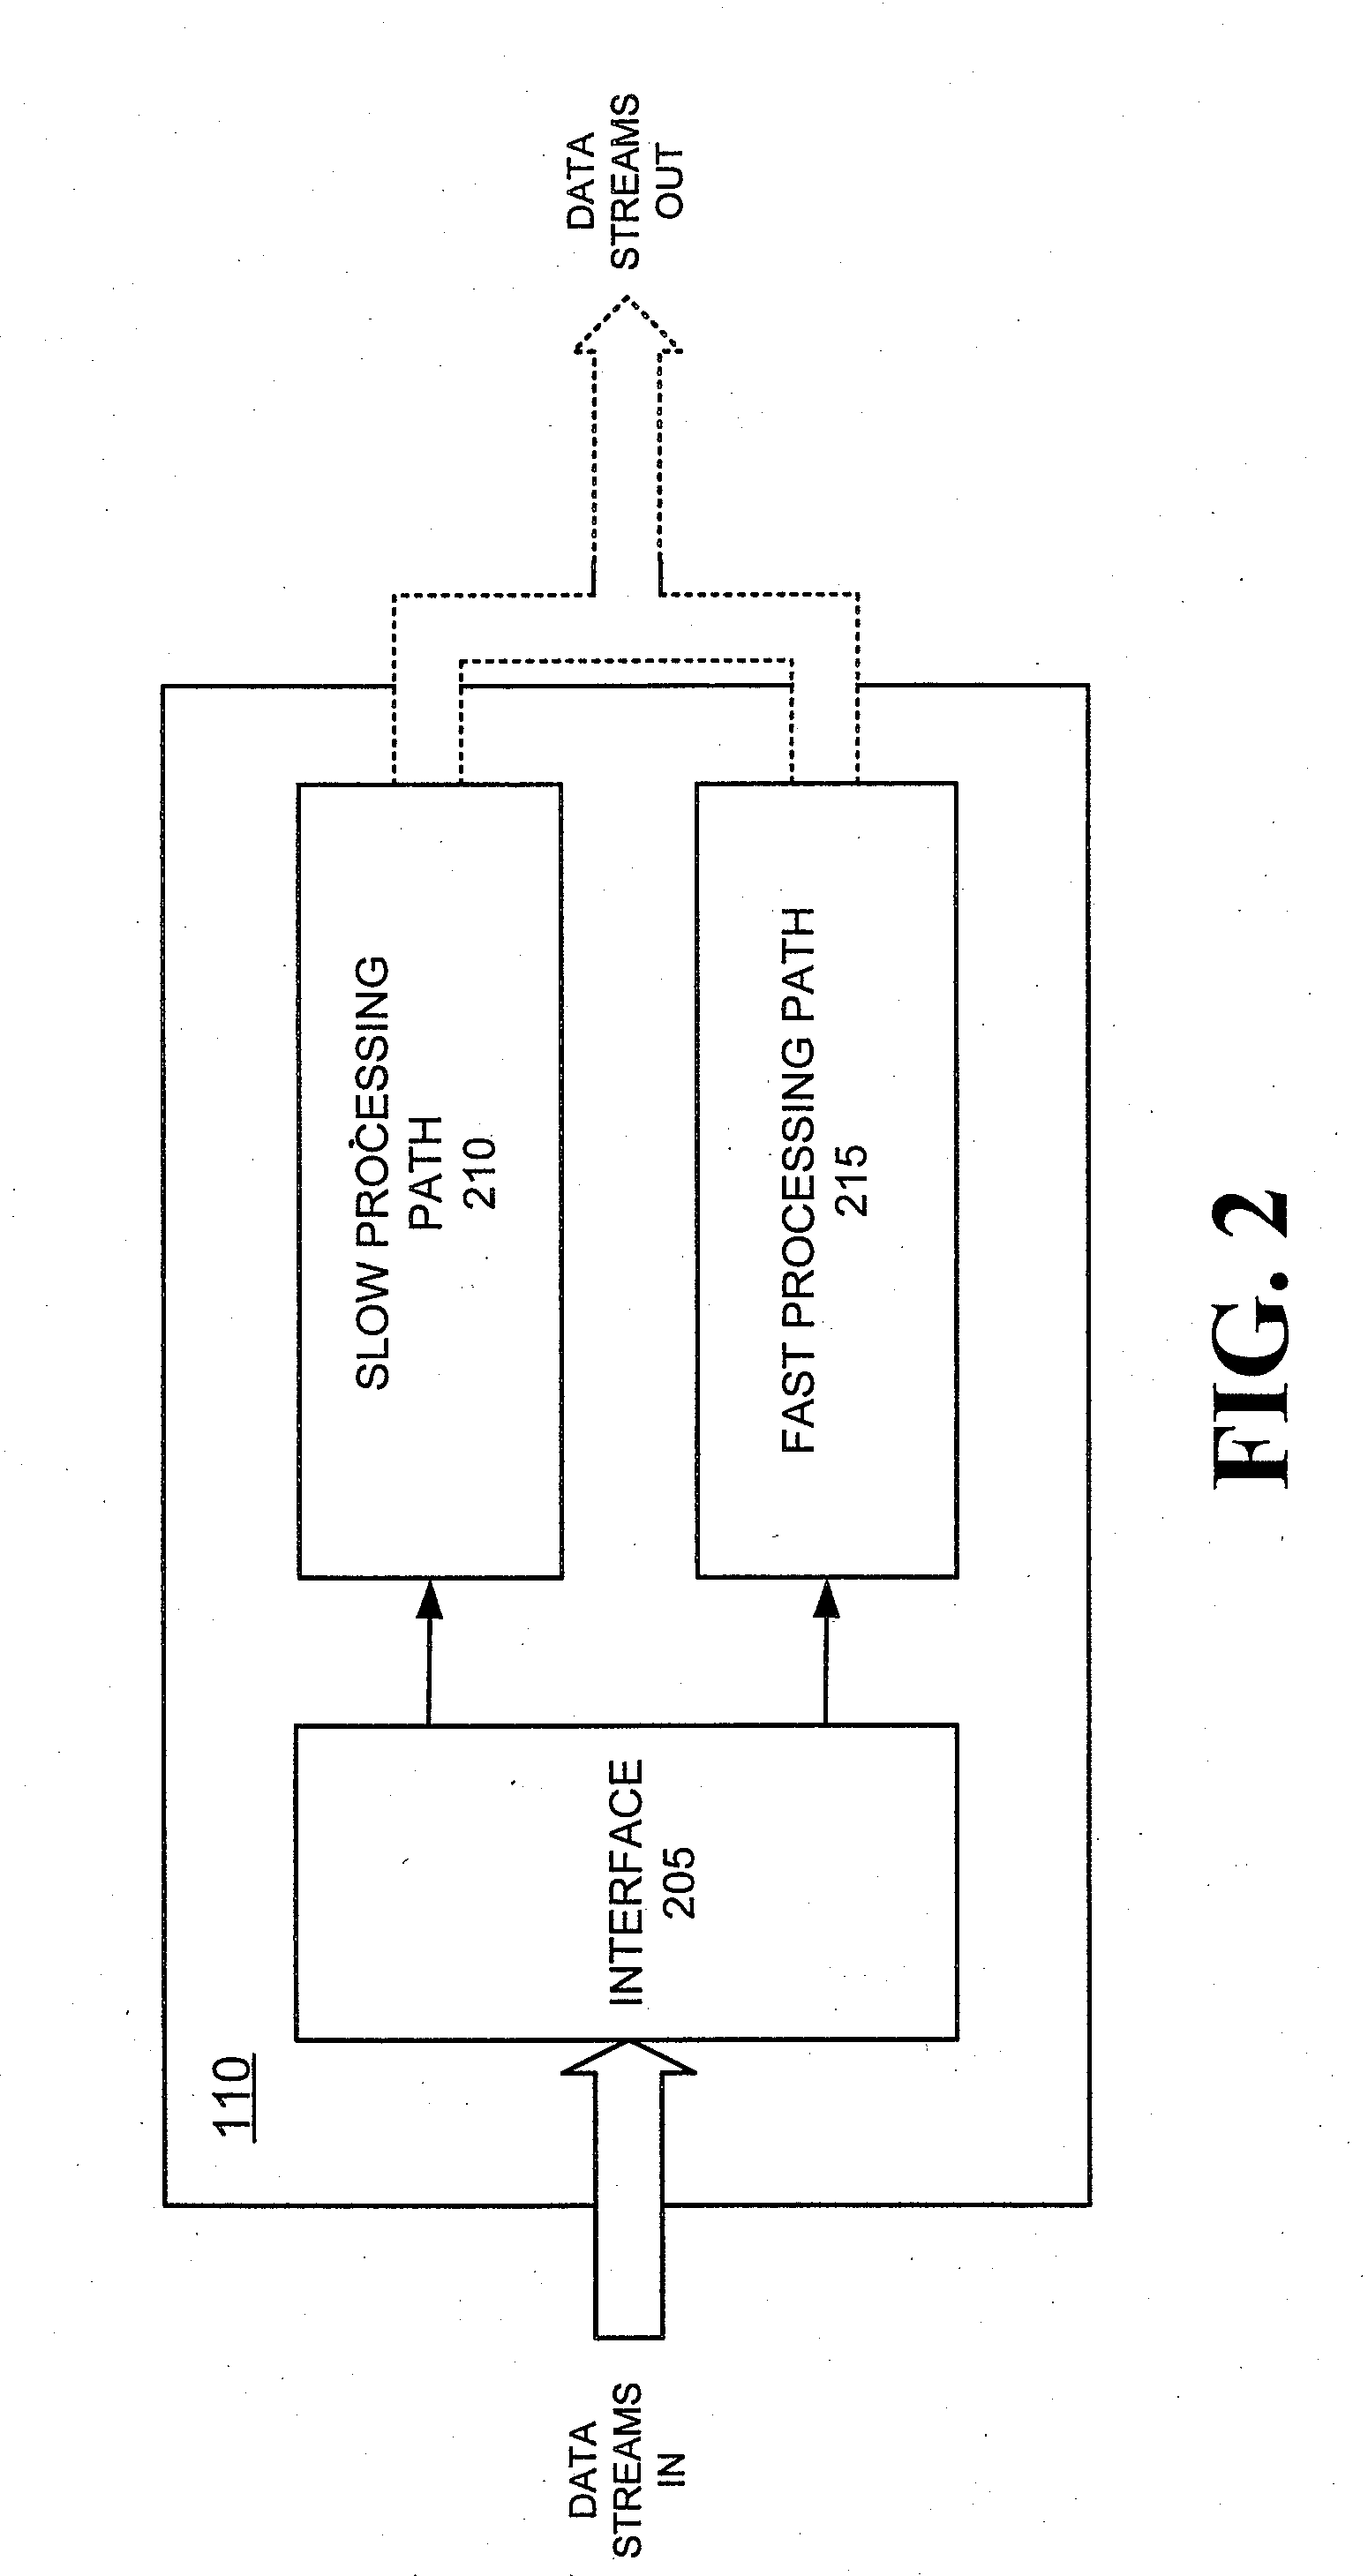 Systems and methods for accelerating tcp/ip data stream processing